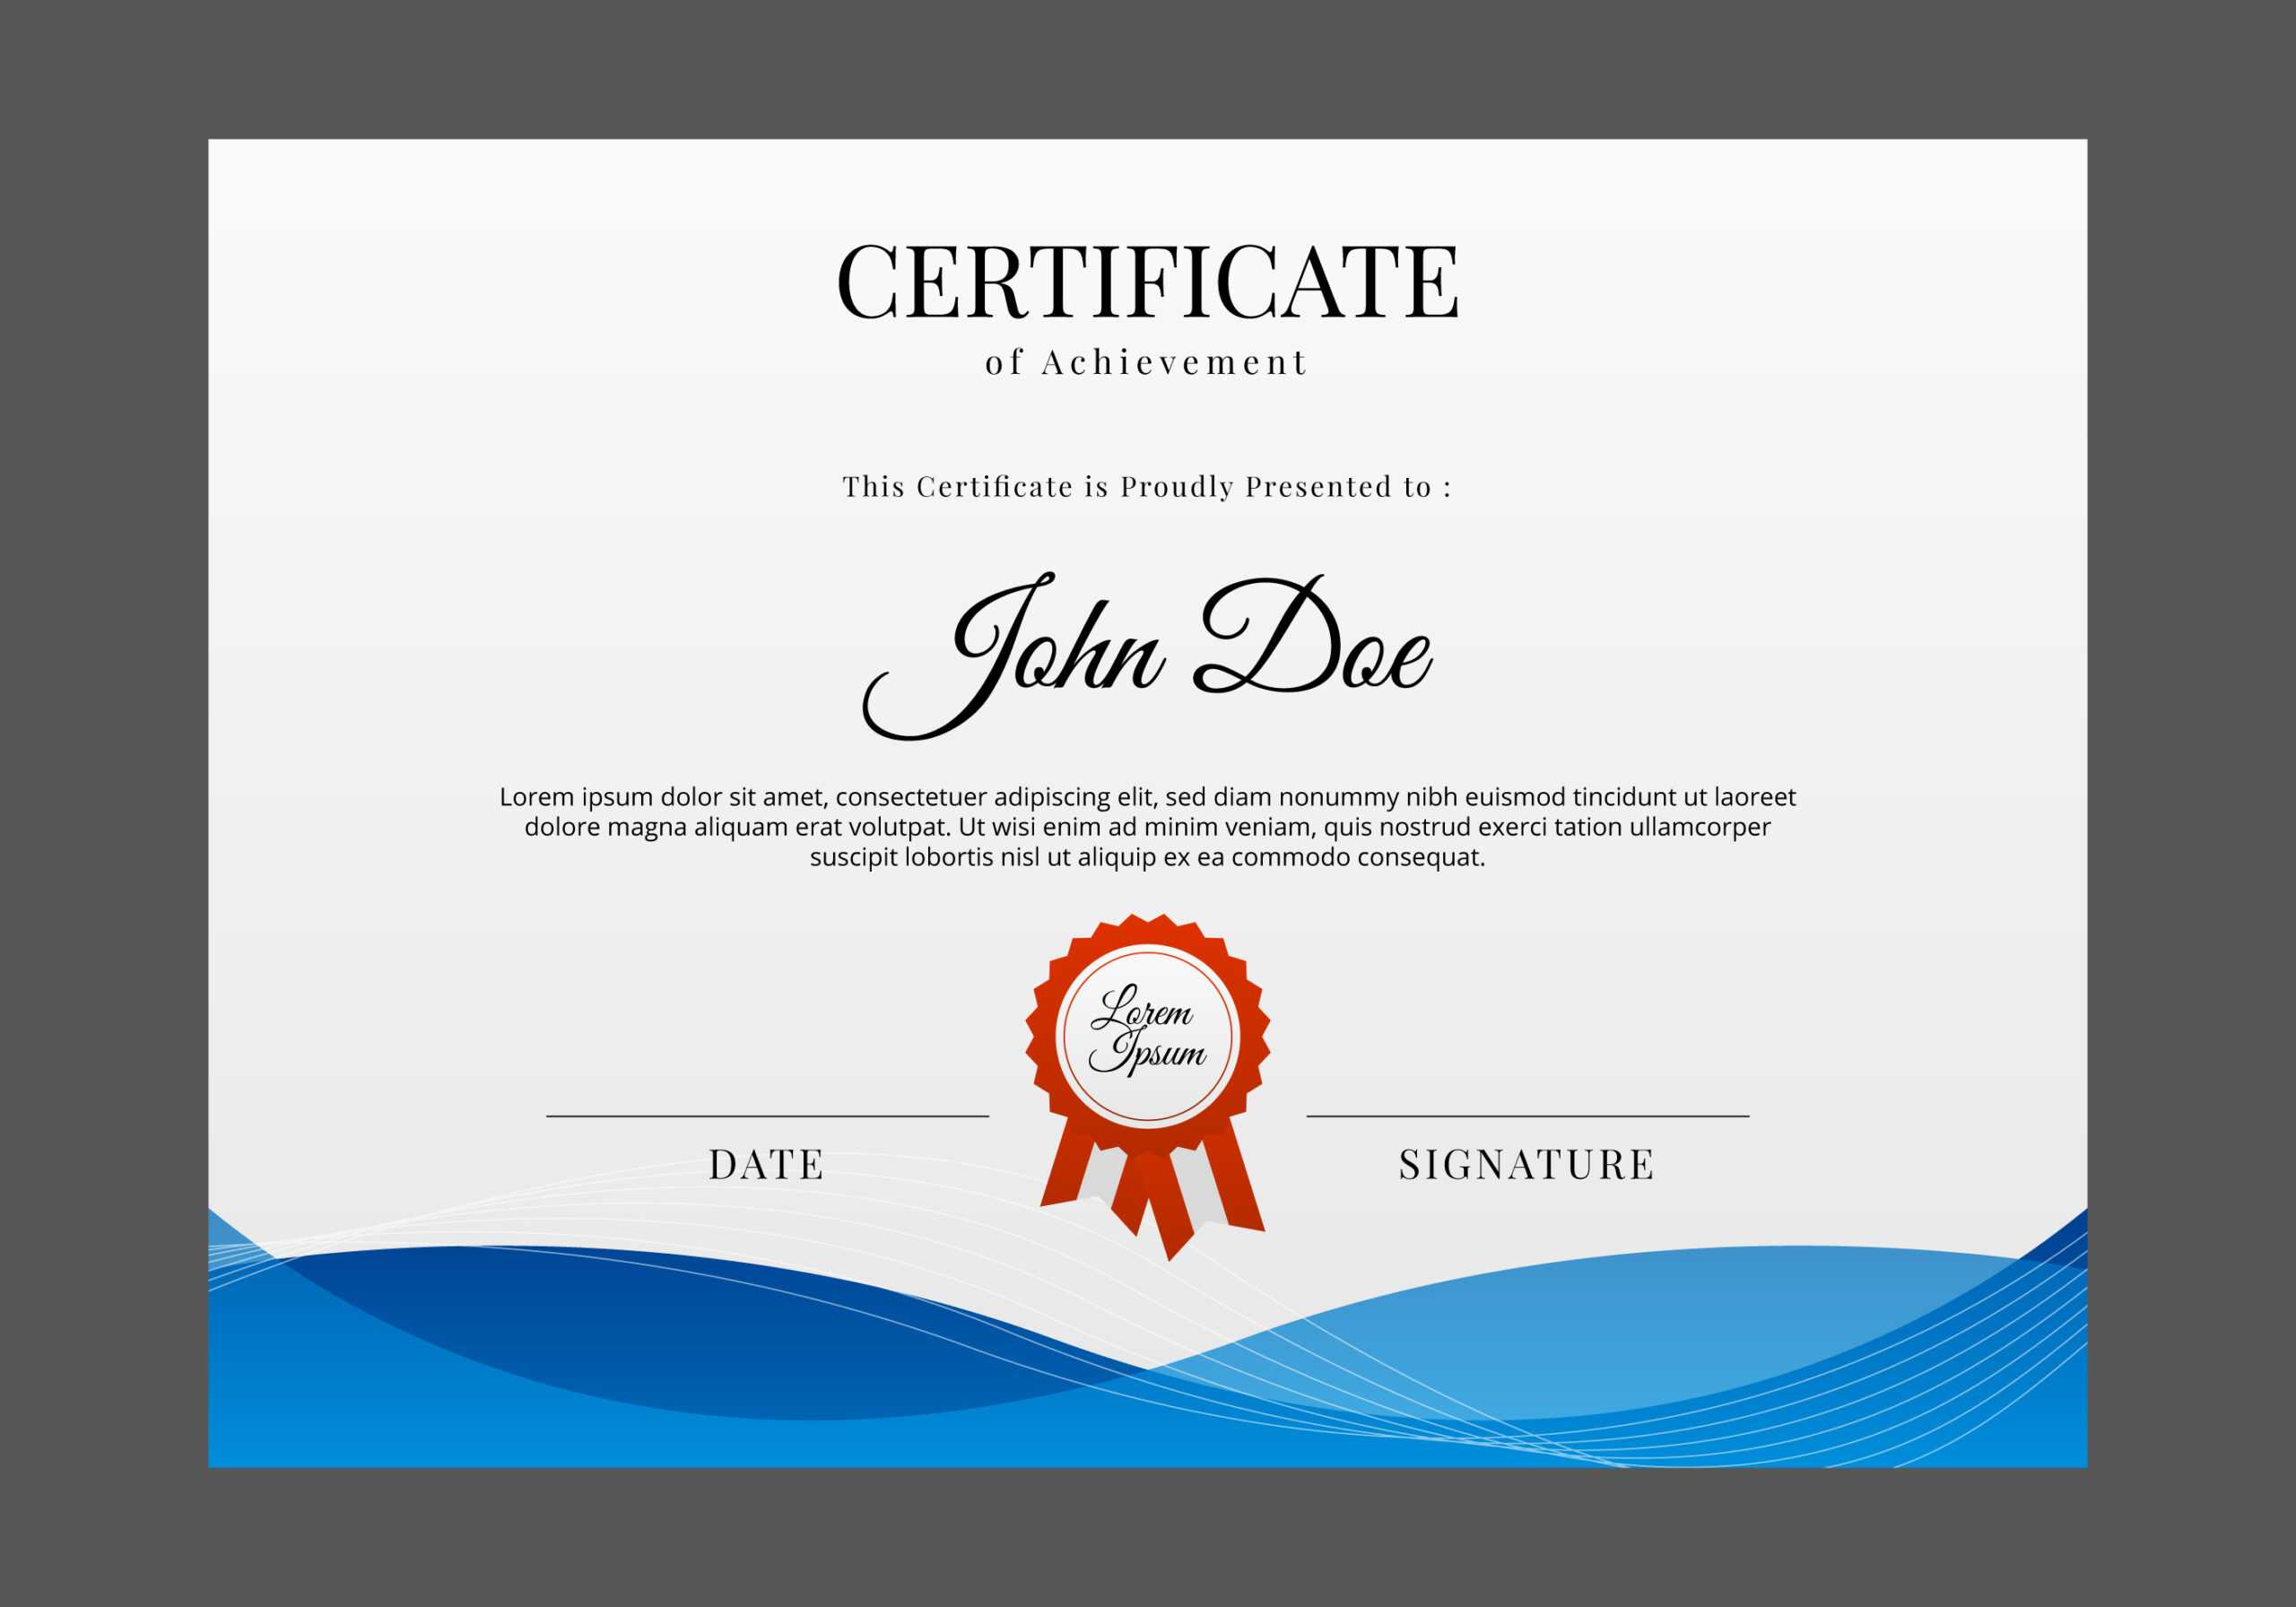 Certificate Templates, Free Certificate Designs Pertaining To Professional Certificate Templates For Word